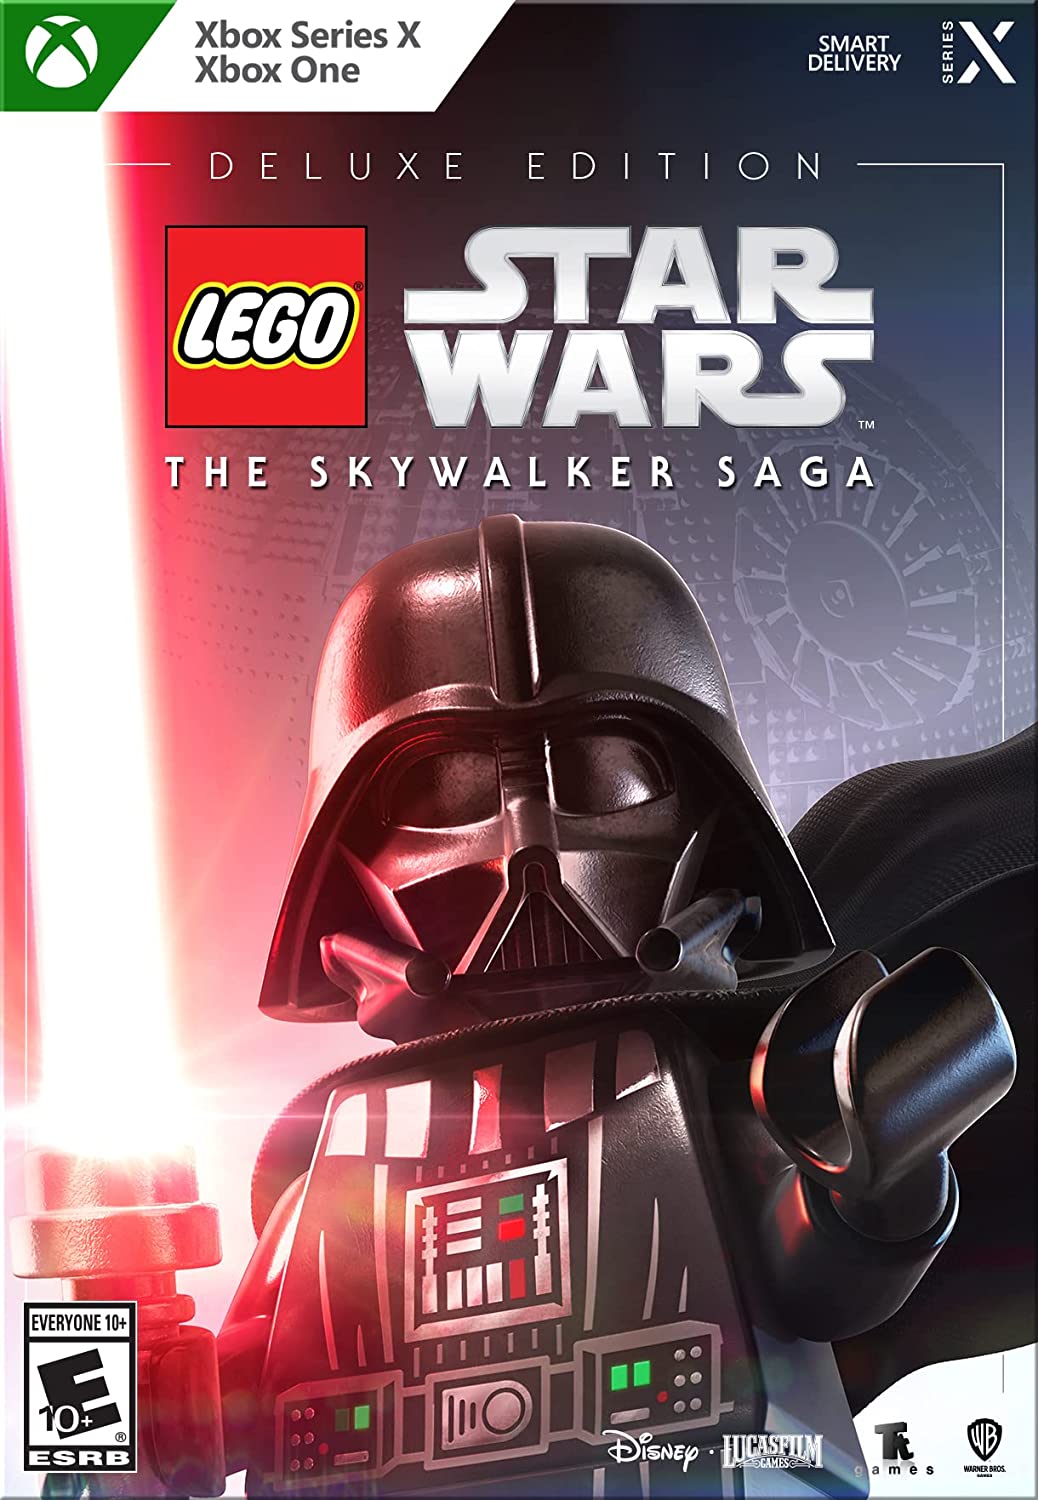 LEGO Star Wars: The Skywalker Saga - Deluxe Edition - (XSX) Xbox Series X Video Games WB Games   